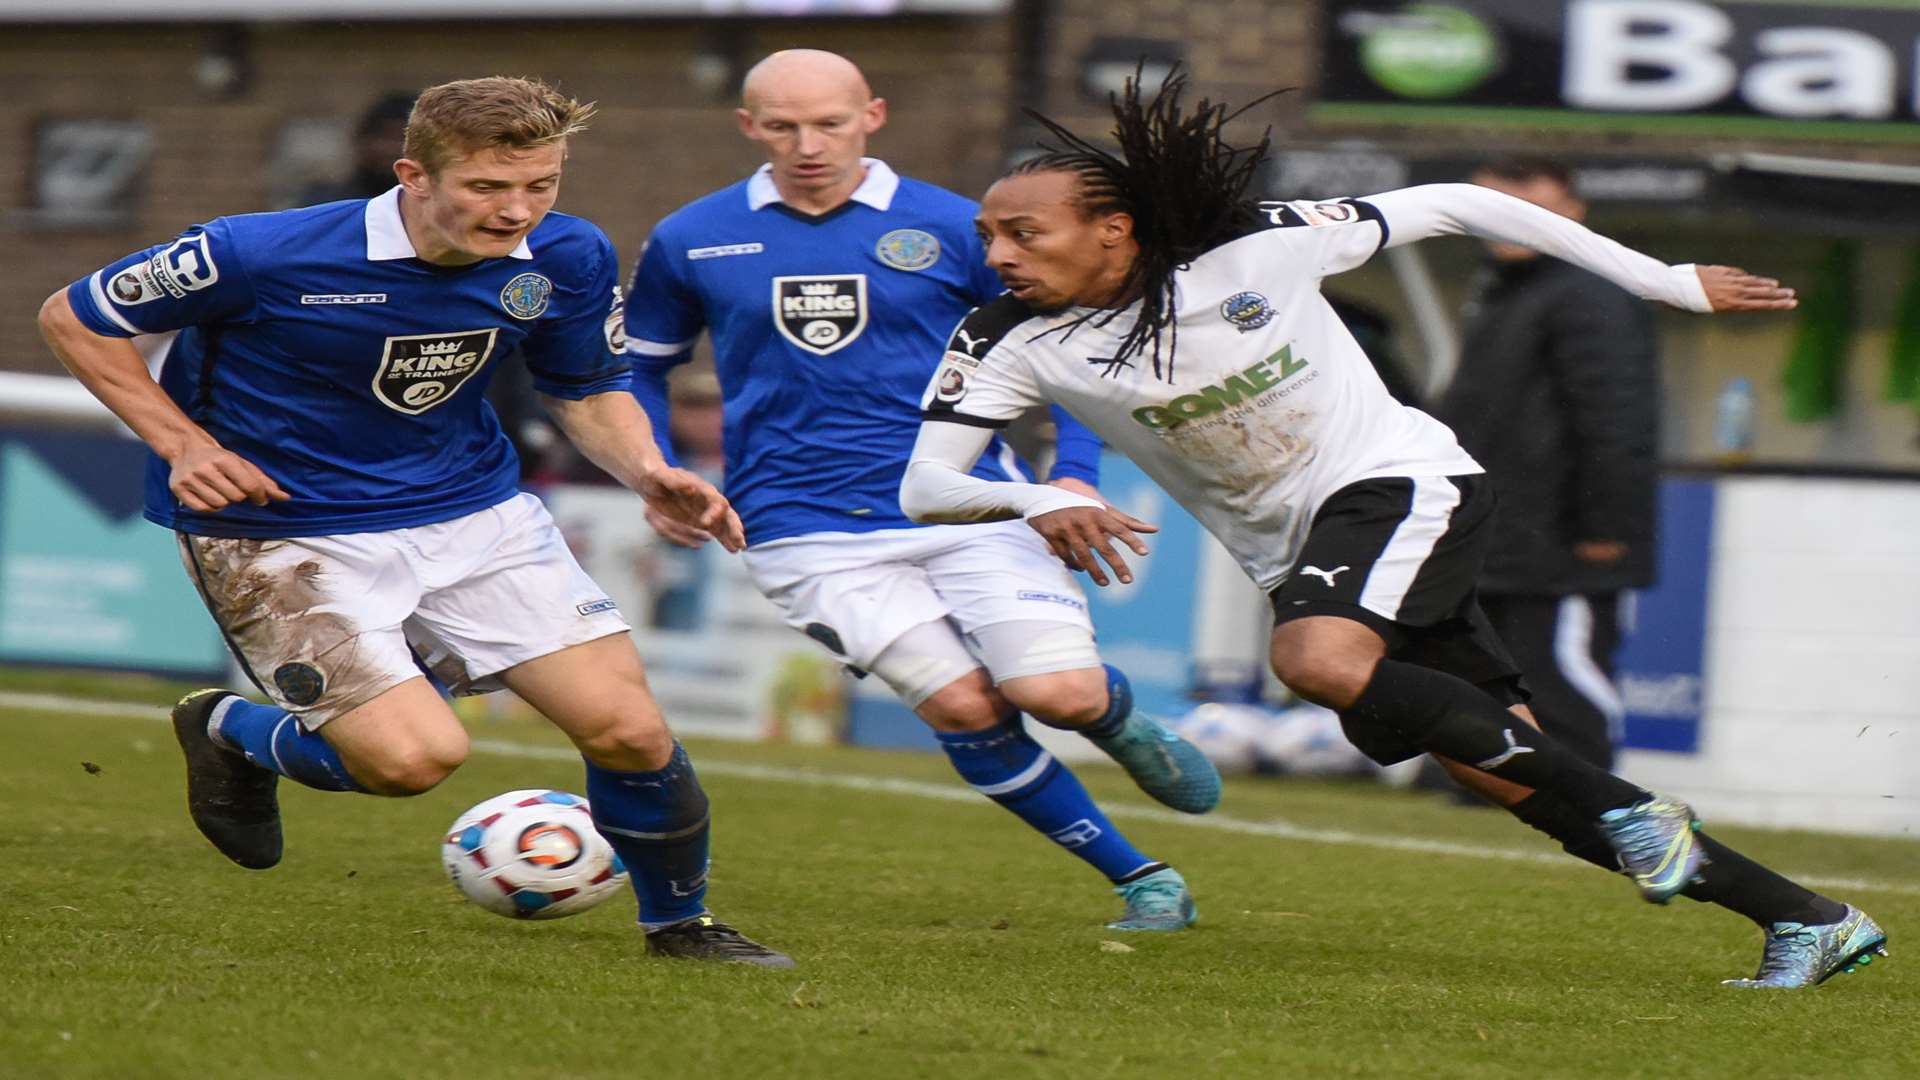 Ricky Modeste in action against Macclesfield at Crabble last month Picture: Alan Langley